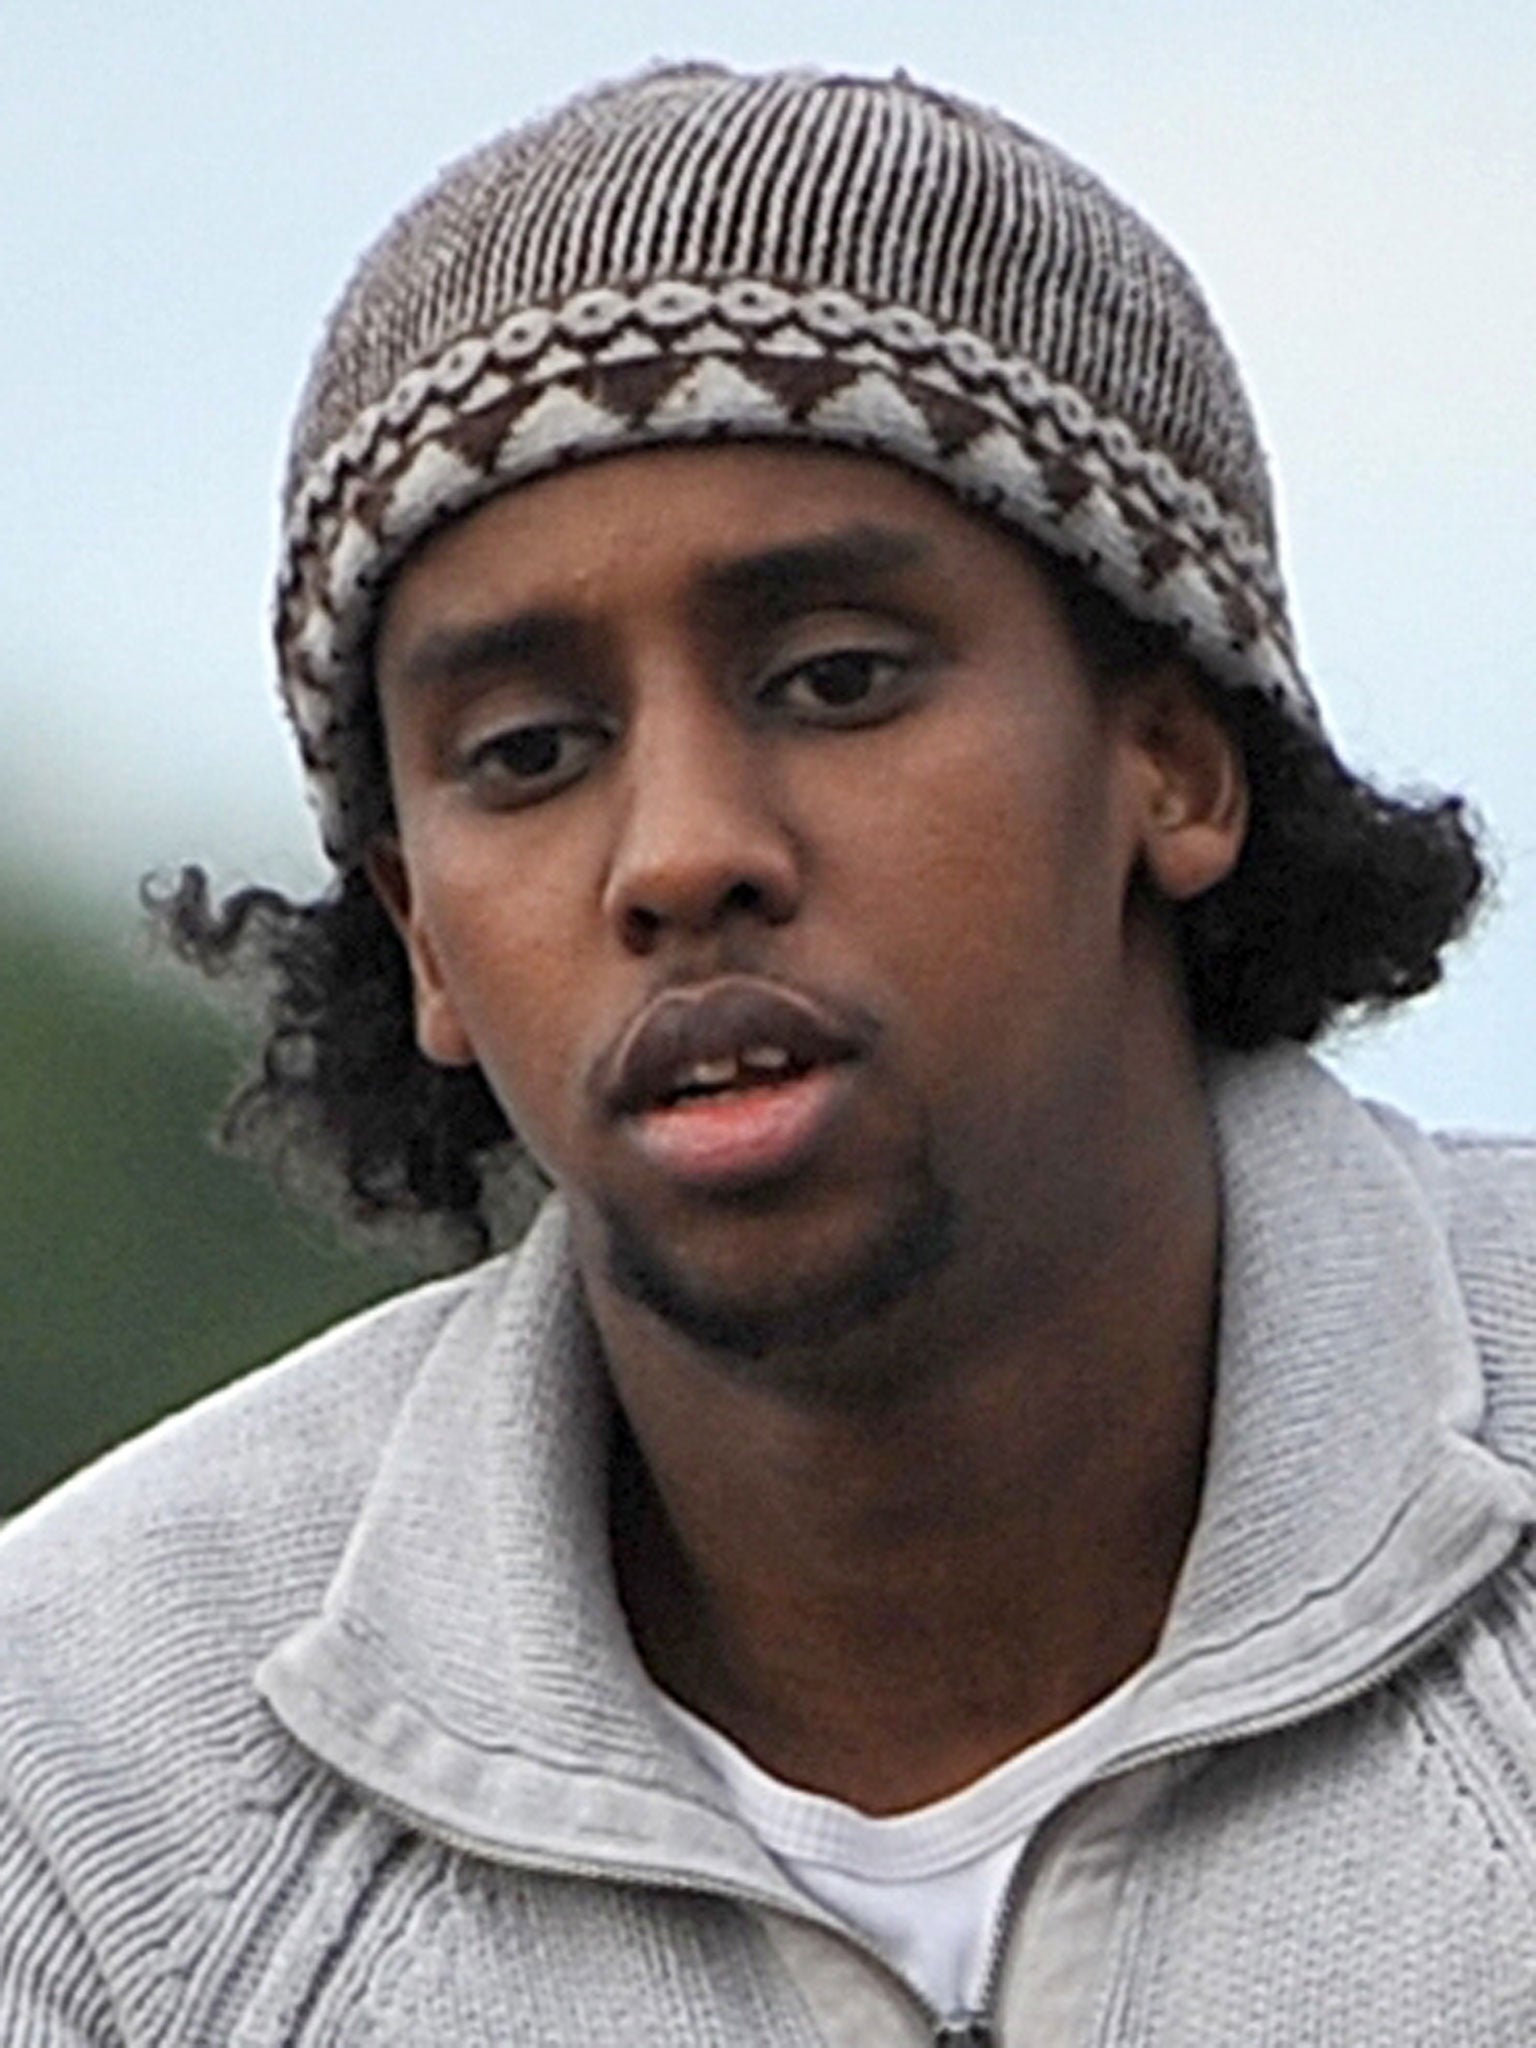 Mohammed Ahmed Mohamed is believed to have links to the Somali group al-Shabaab